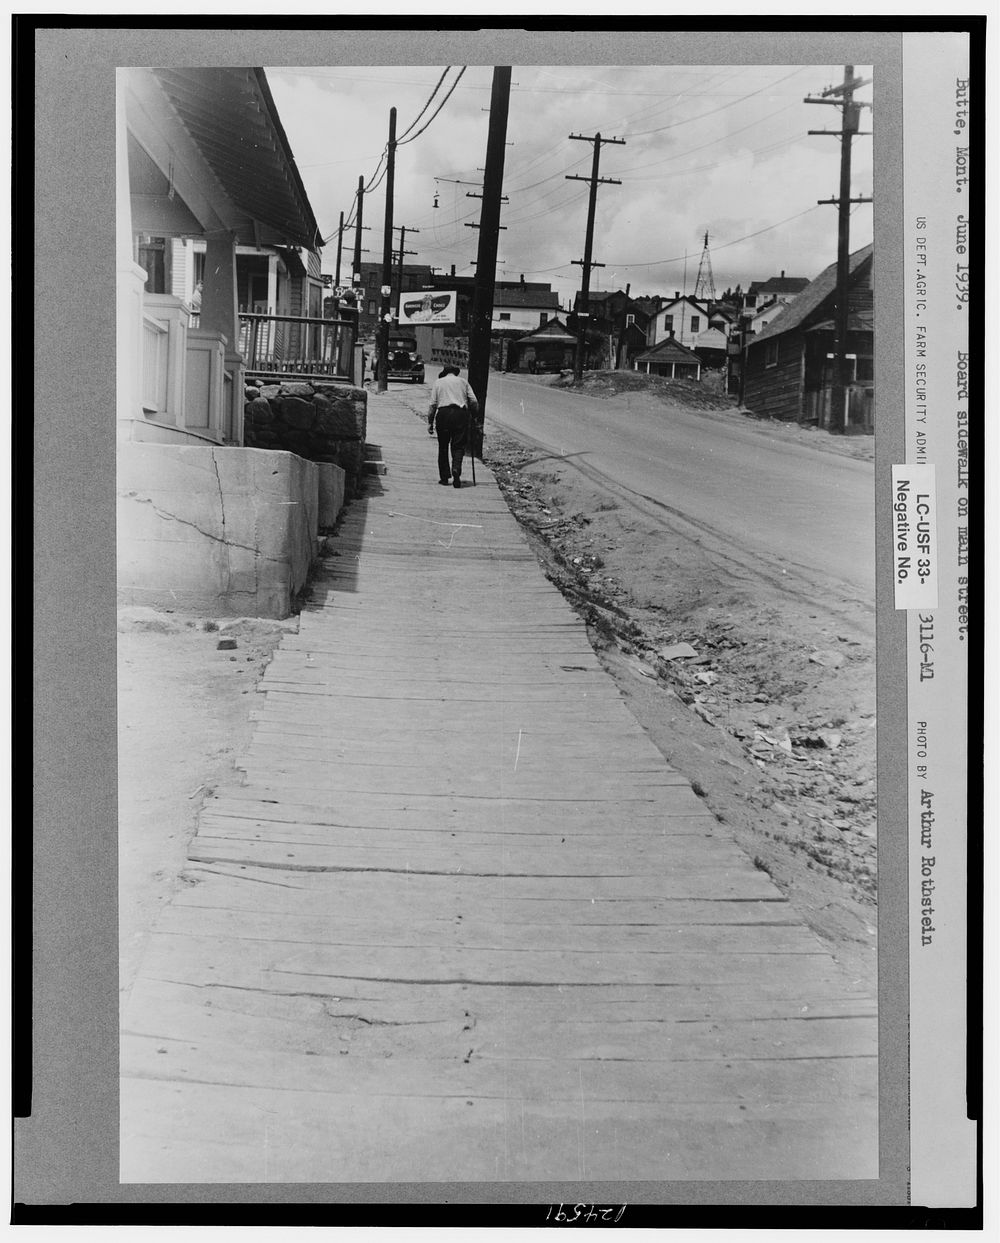 Board sidewalk on main street. Butte, Montana. Sourced from the Library of Congress.